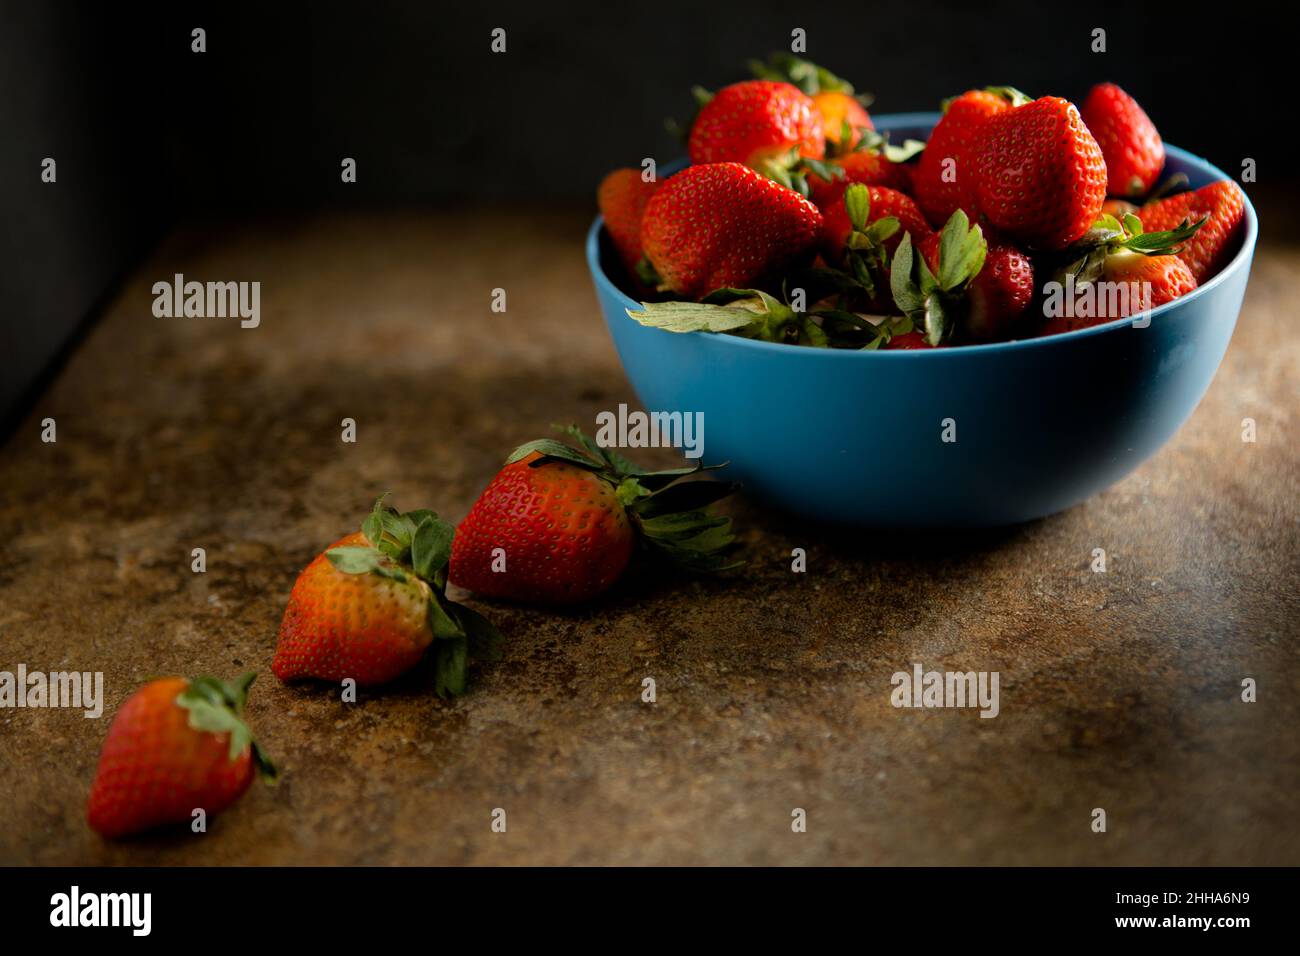 A blue bowl of fresh strawberries with dark and moody lighting Stock Photo